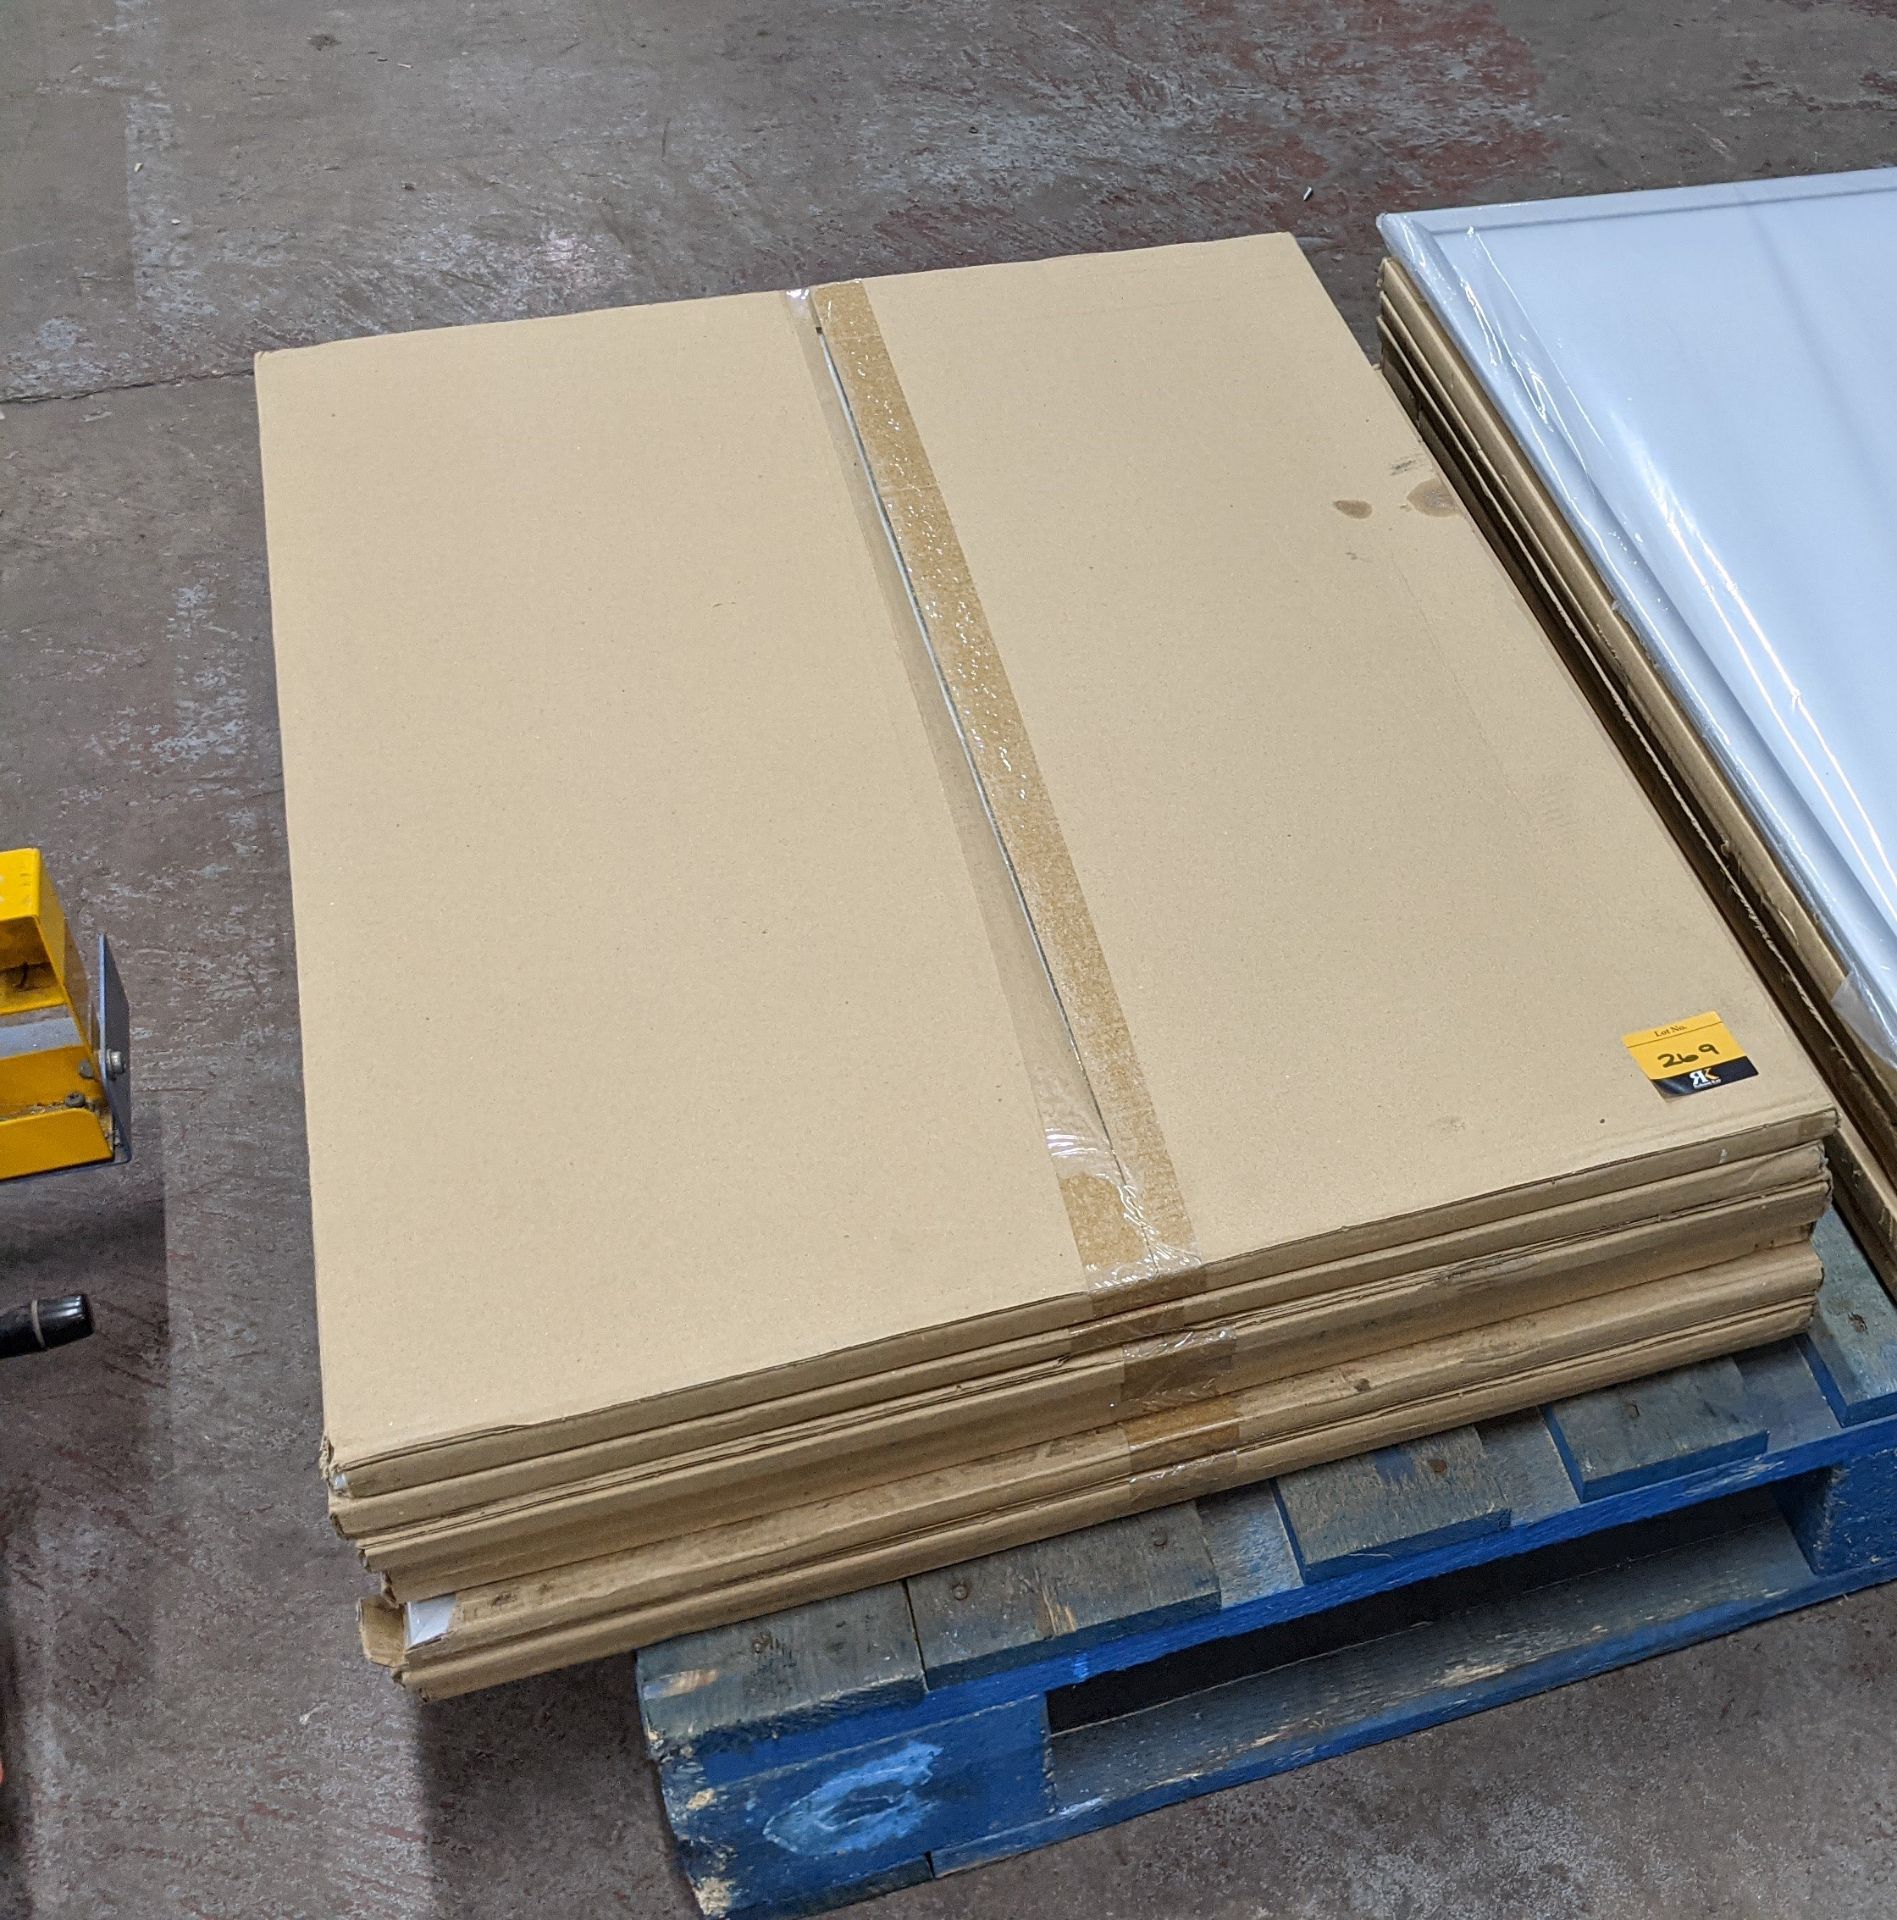 8 off large display boards, each measuring circa 870mm x 630mm